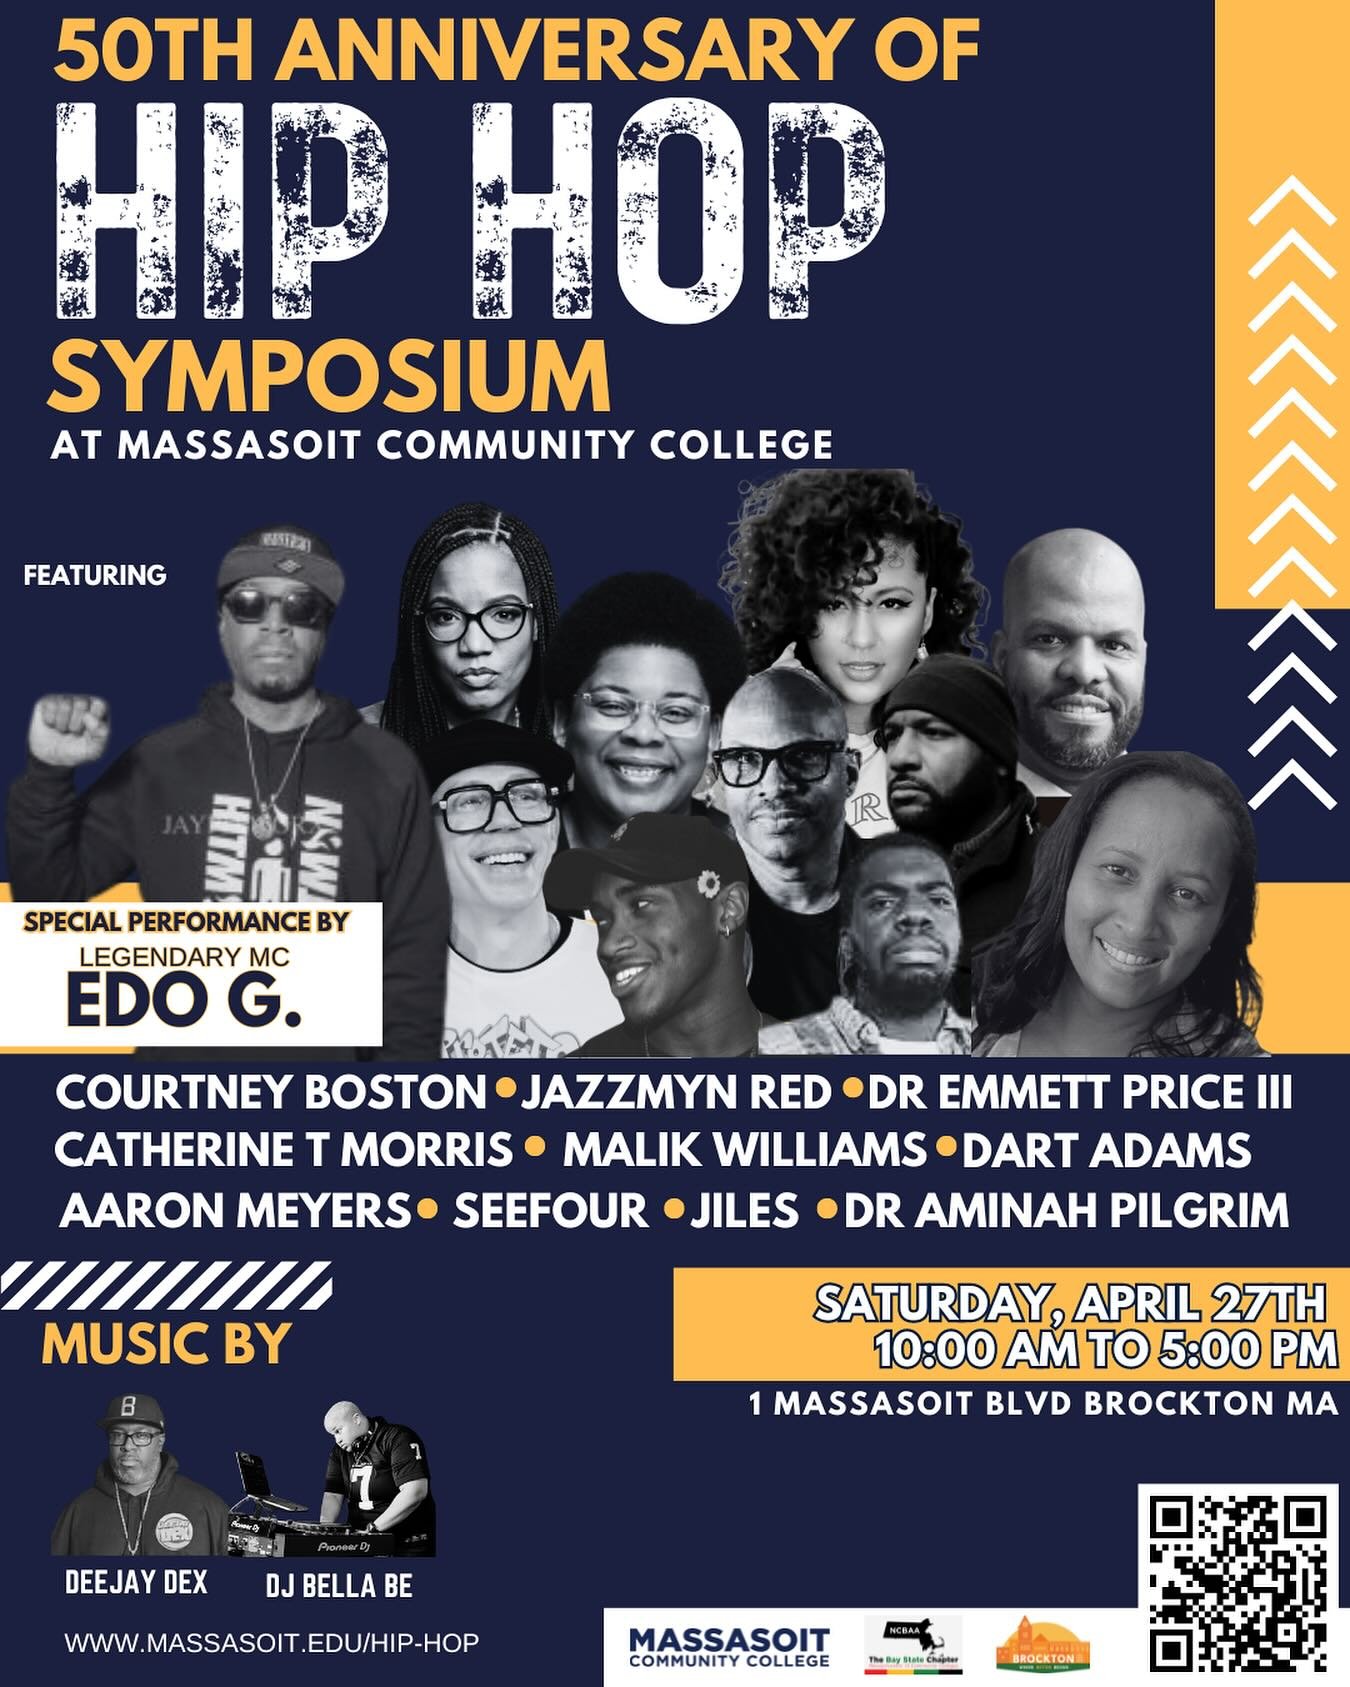 Join us on Saturday, April 27th at Massasoit&rsquo;s 50th Anniversary of Hip Hop Symposium on Massasoit&rsquo;s Brockton campus from 10 AM to 5 PM. We&rsquo;ll have music, food, panel discussions, performances, vendors, graffiti art, dance, and more!